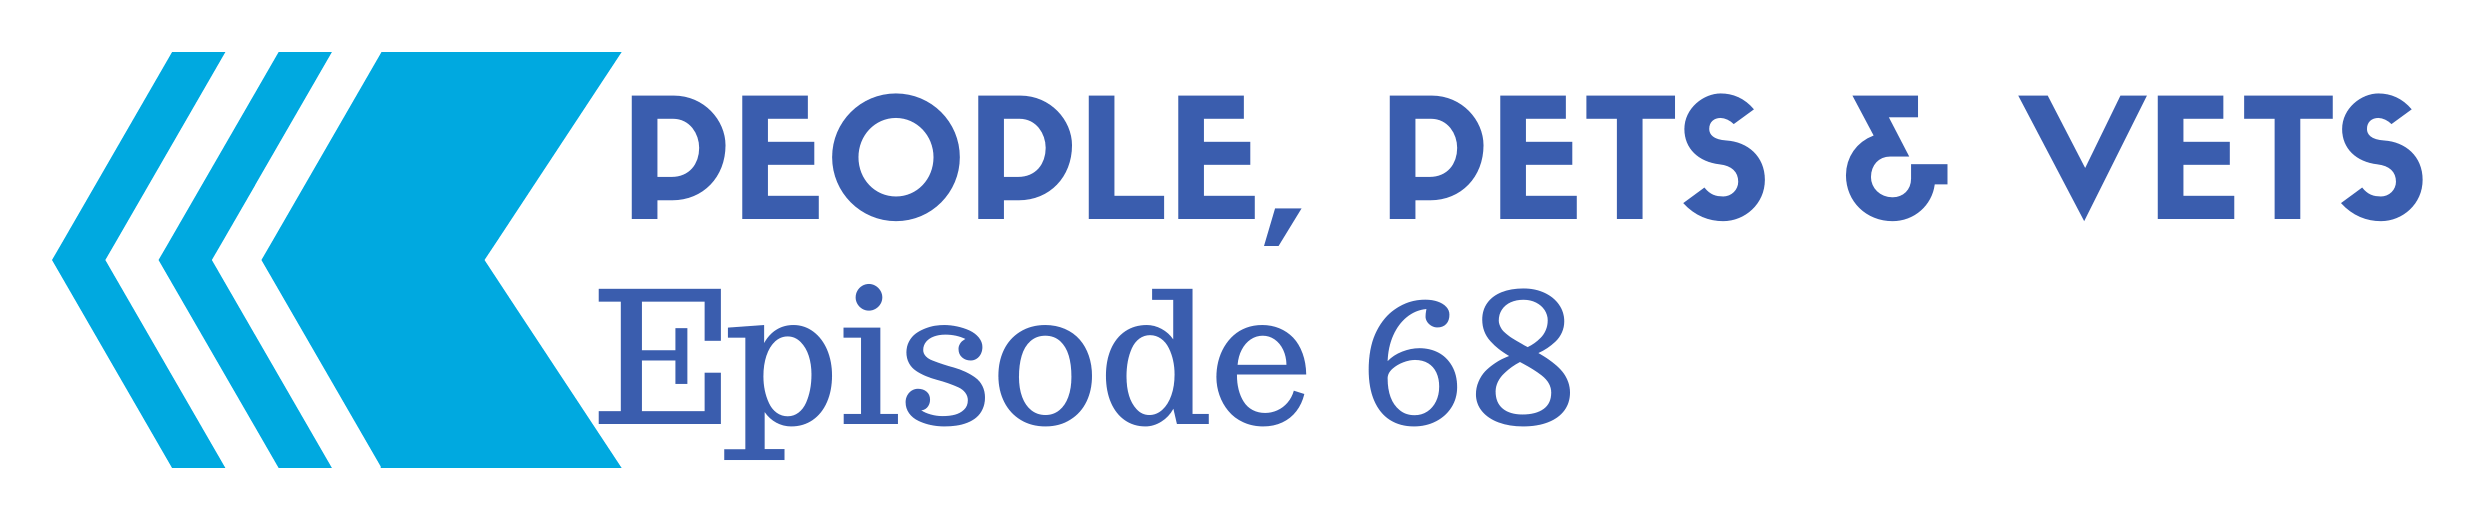 Back to Episode 68